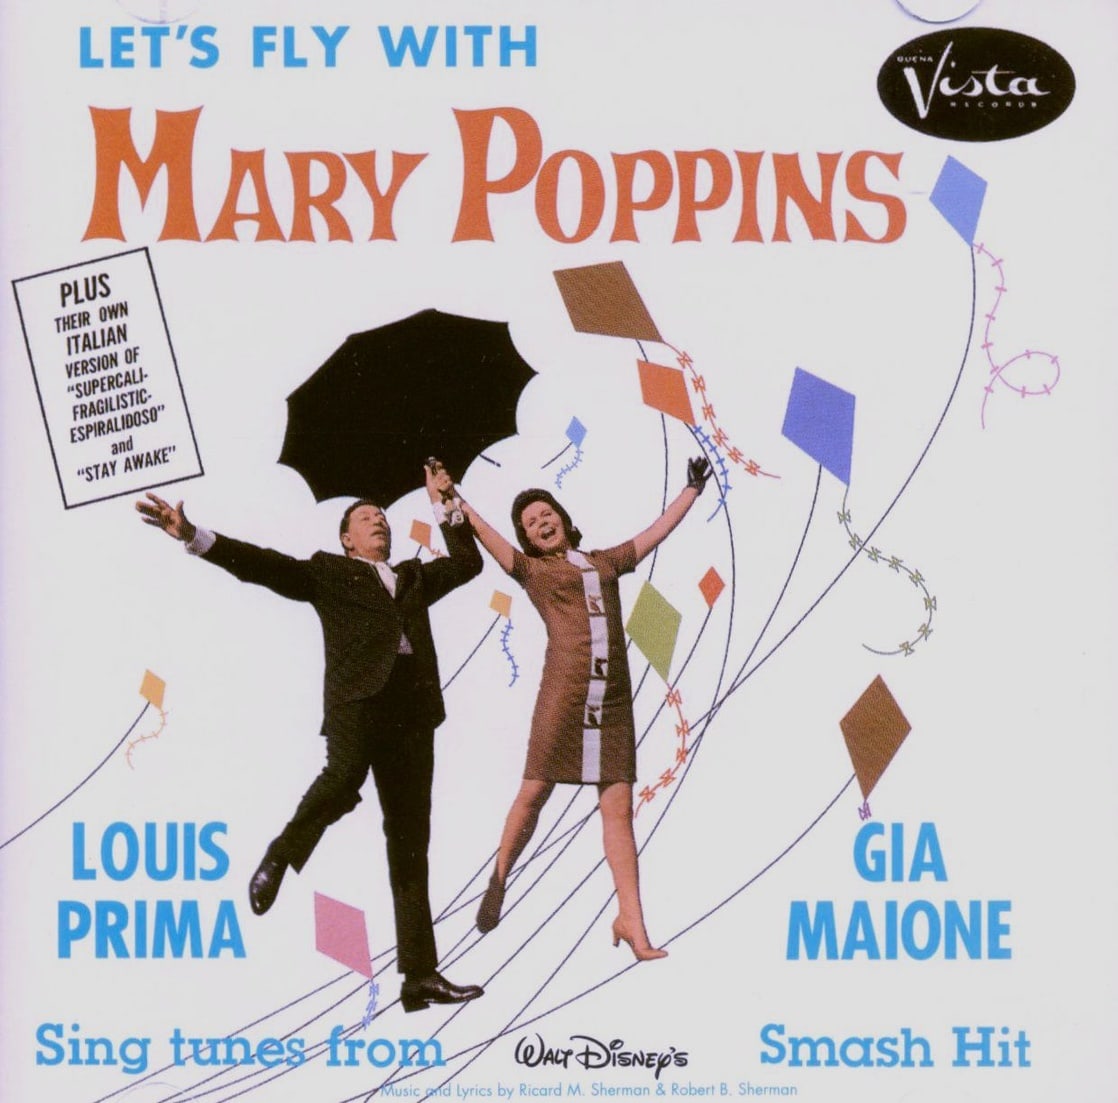 Let's Fly with Mary Poppins